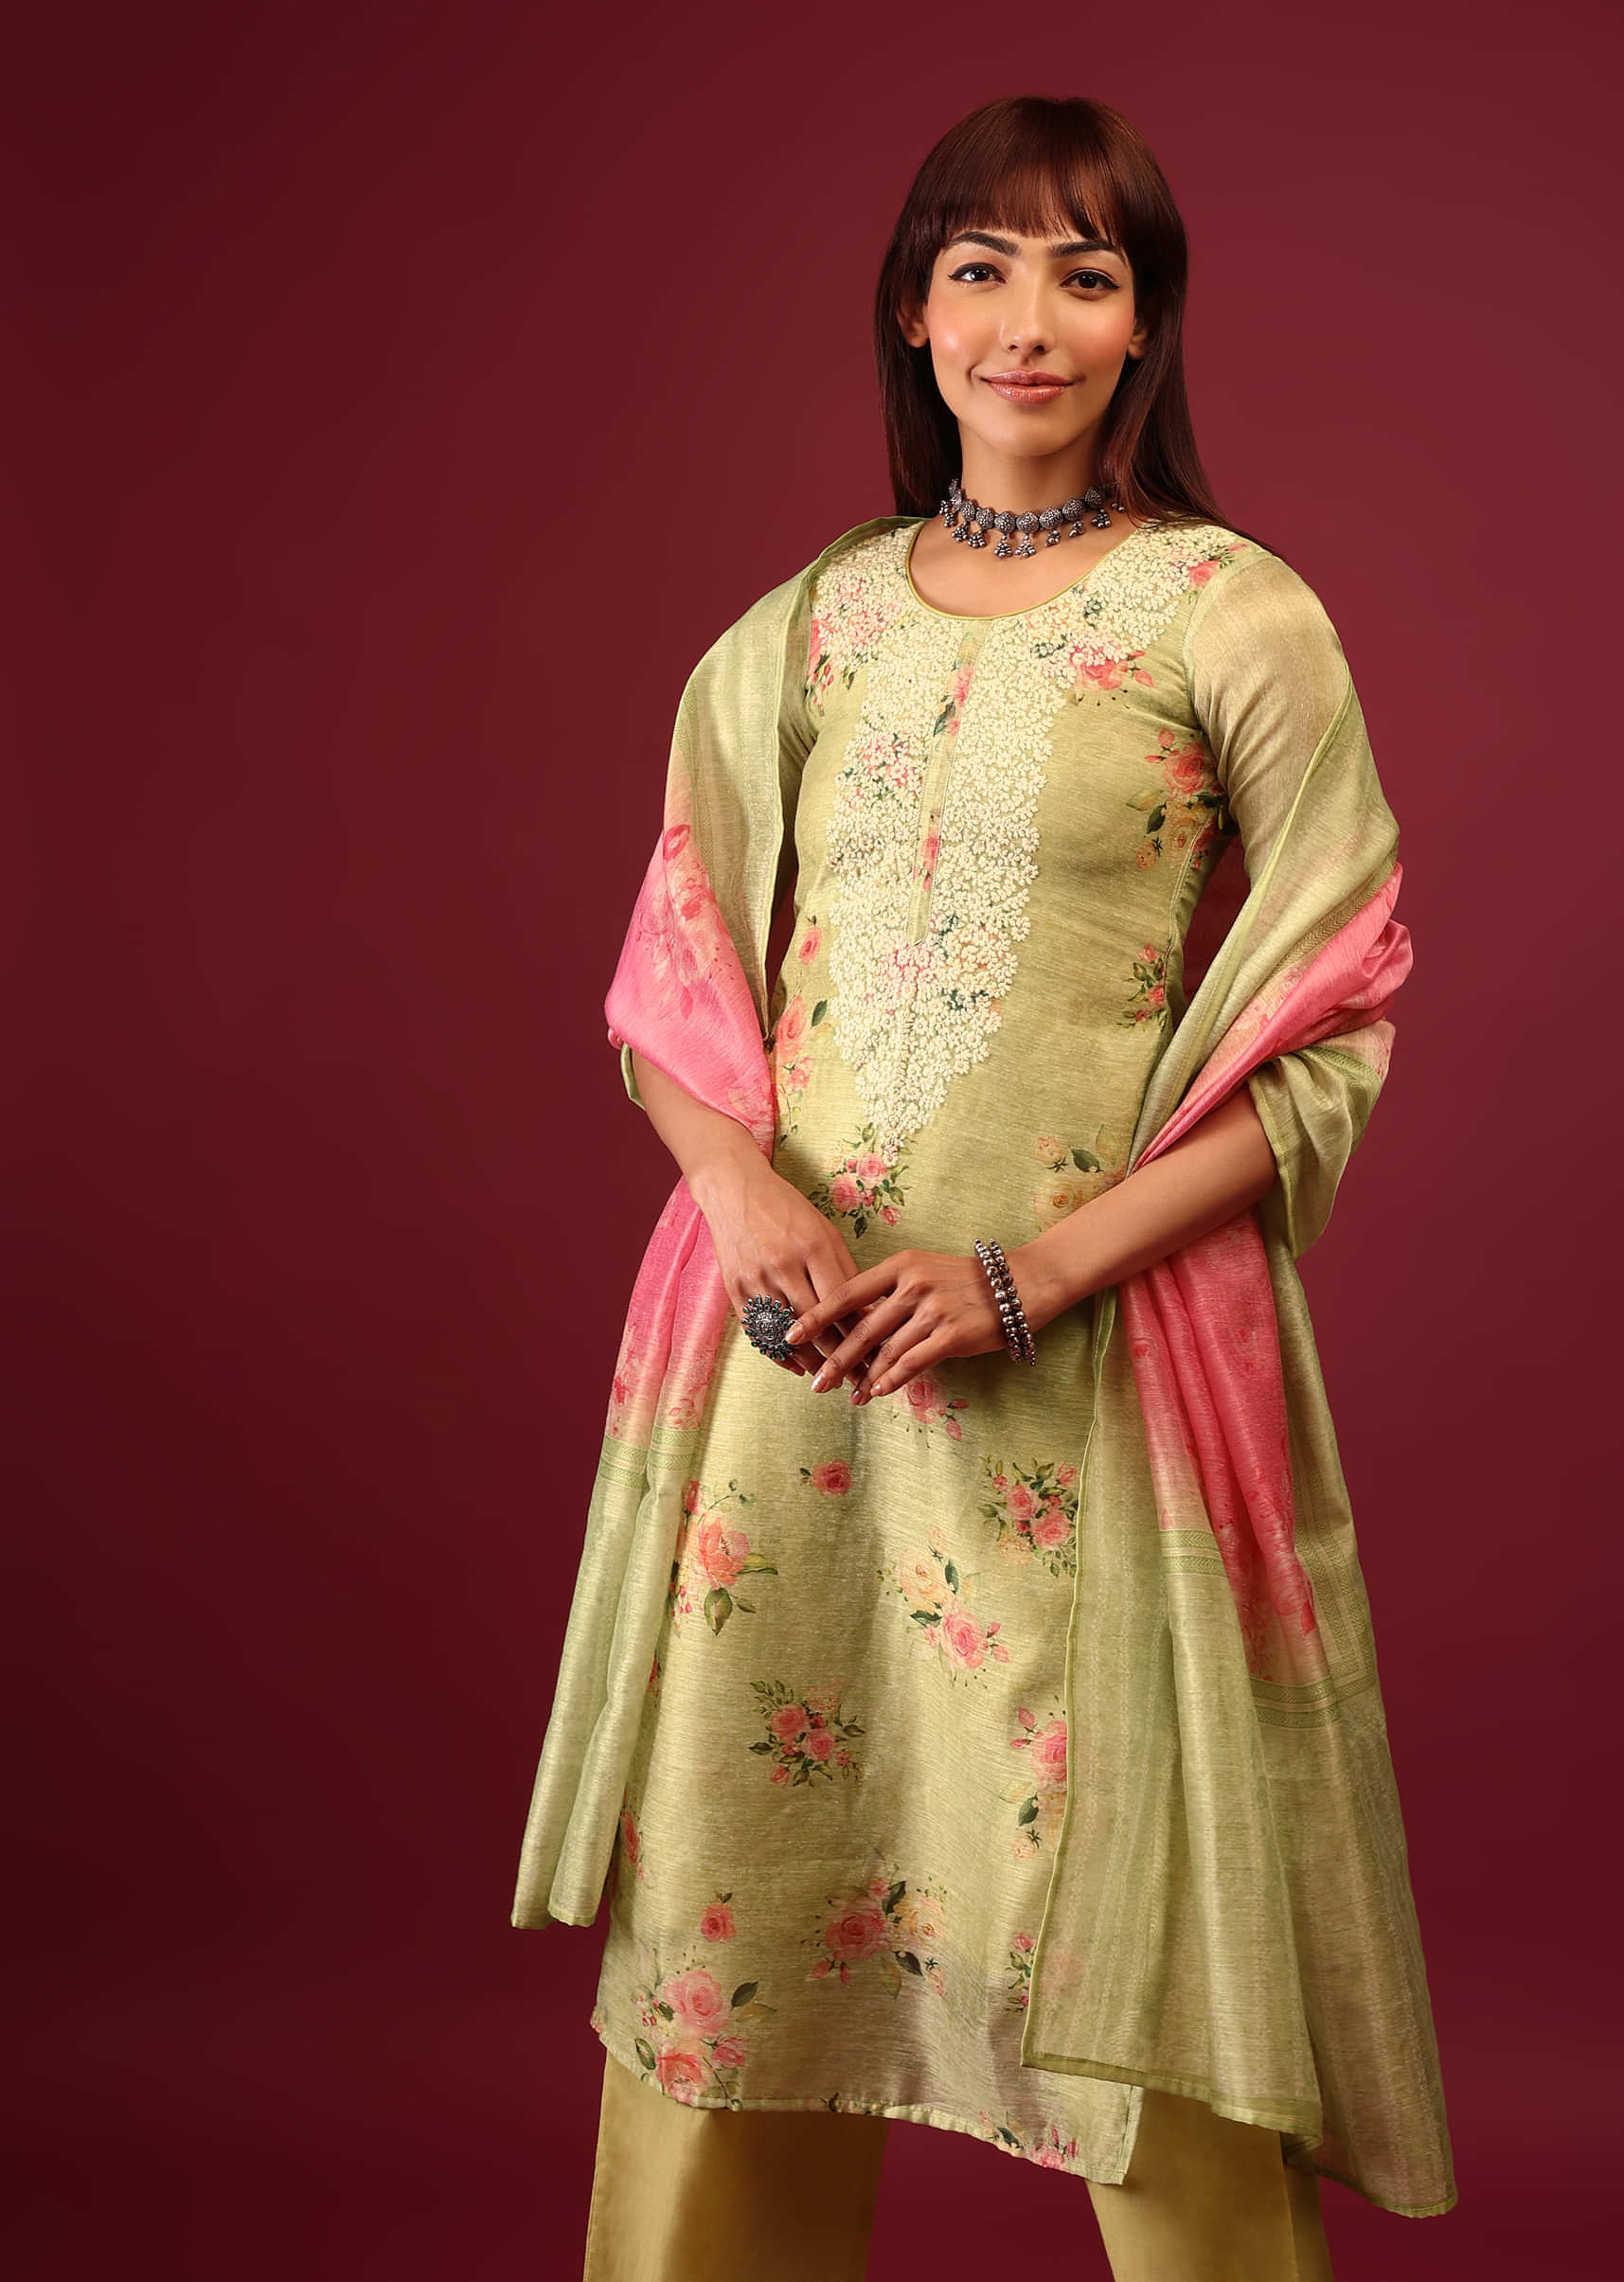 Lime Green Floral Print Palazzo Suit In U Neckline With Zari Embroidery